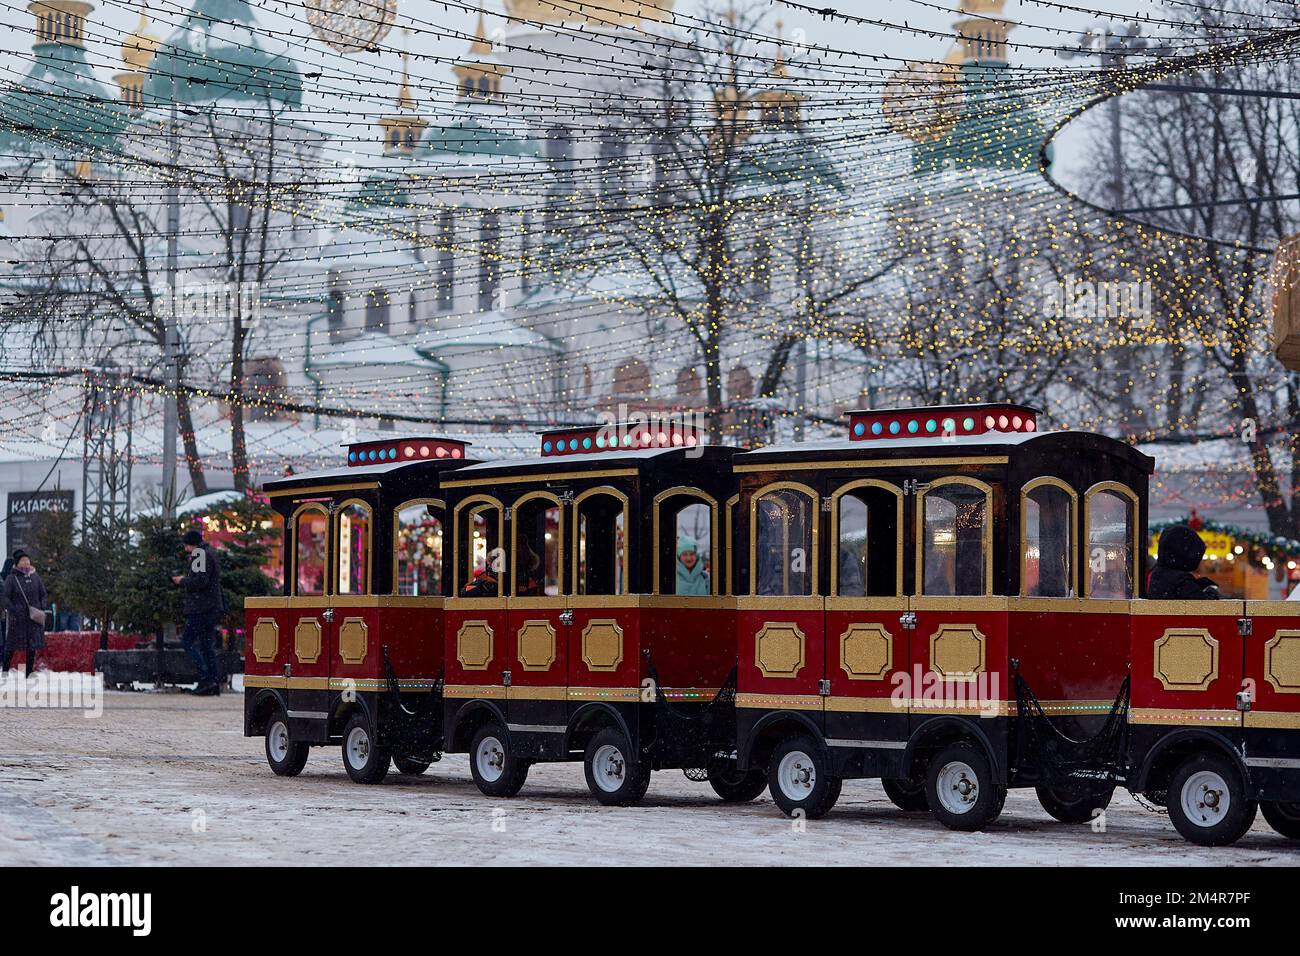 Kyiv, Ukraine - January, 2022: Joyful Christmas atmosphere with festive train in front of golden domes of the temple and lights at the evening. New Year holidays before war in Ukraine. Stock Photo